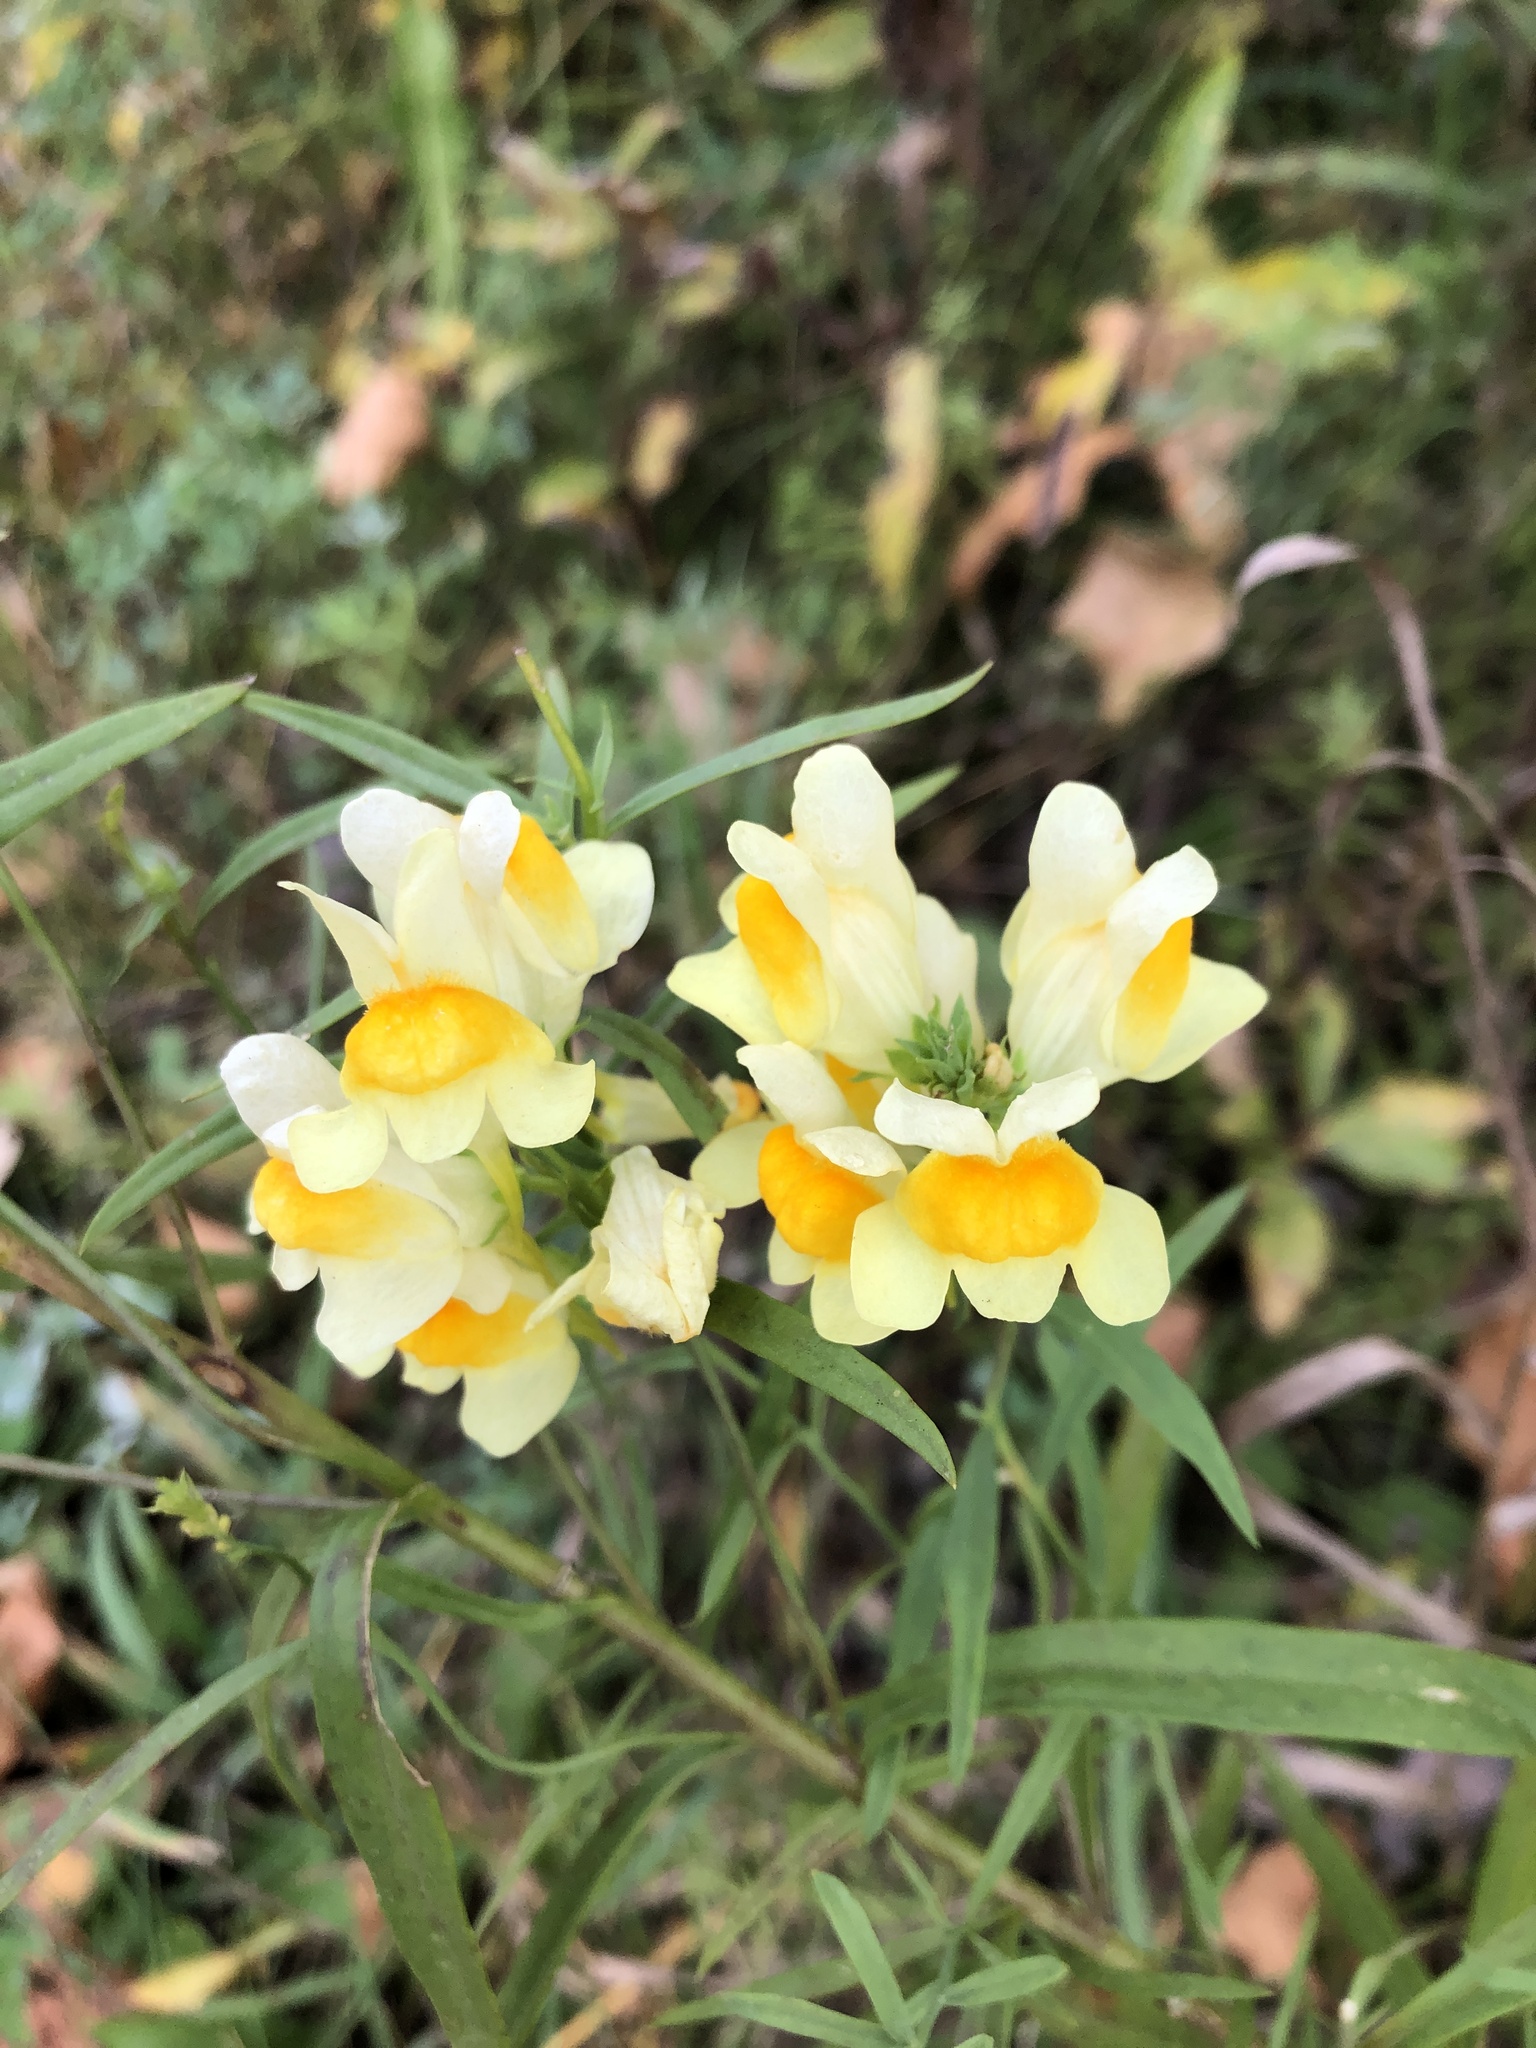 photo of Linaria vulgaris / butter and eggs in Assiniboine Forest Winnipeg Manitoba MG. Photo by marleneontheprairie via iNaturalist CC BY-SA